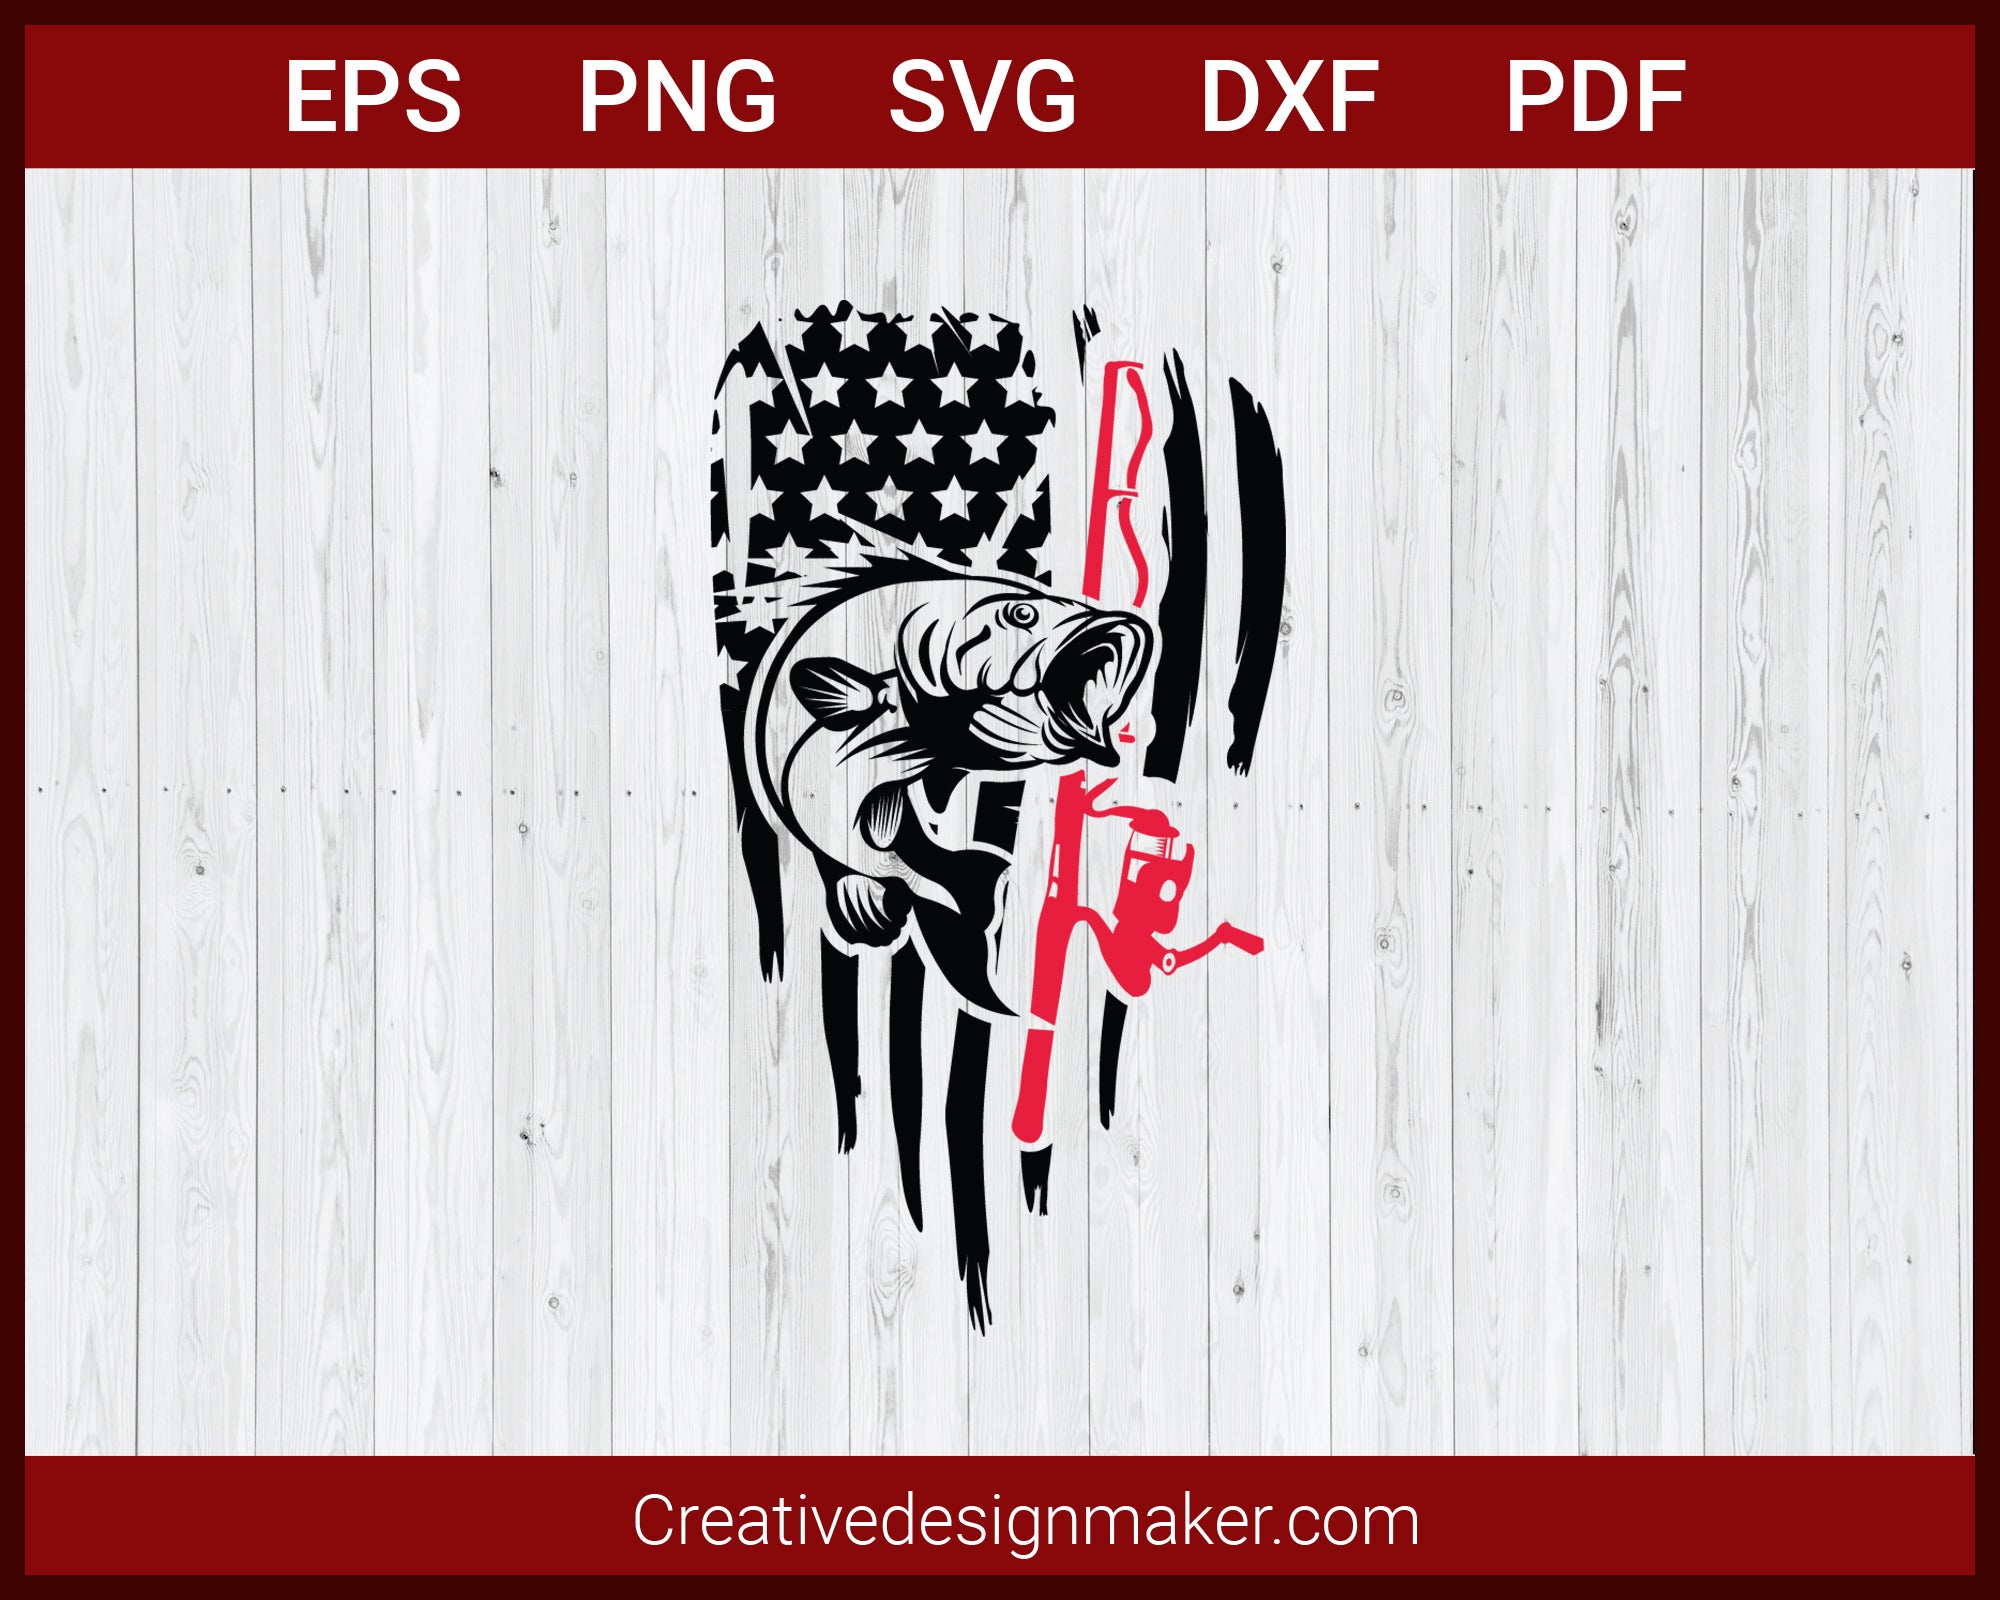 Distressed American Flag Hunting Fishing SVG Cricut Silhouette DXF PNG EPS Cut File